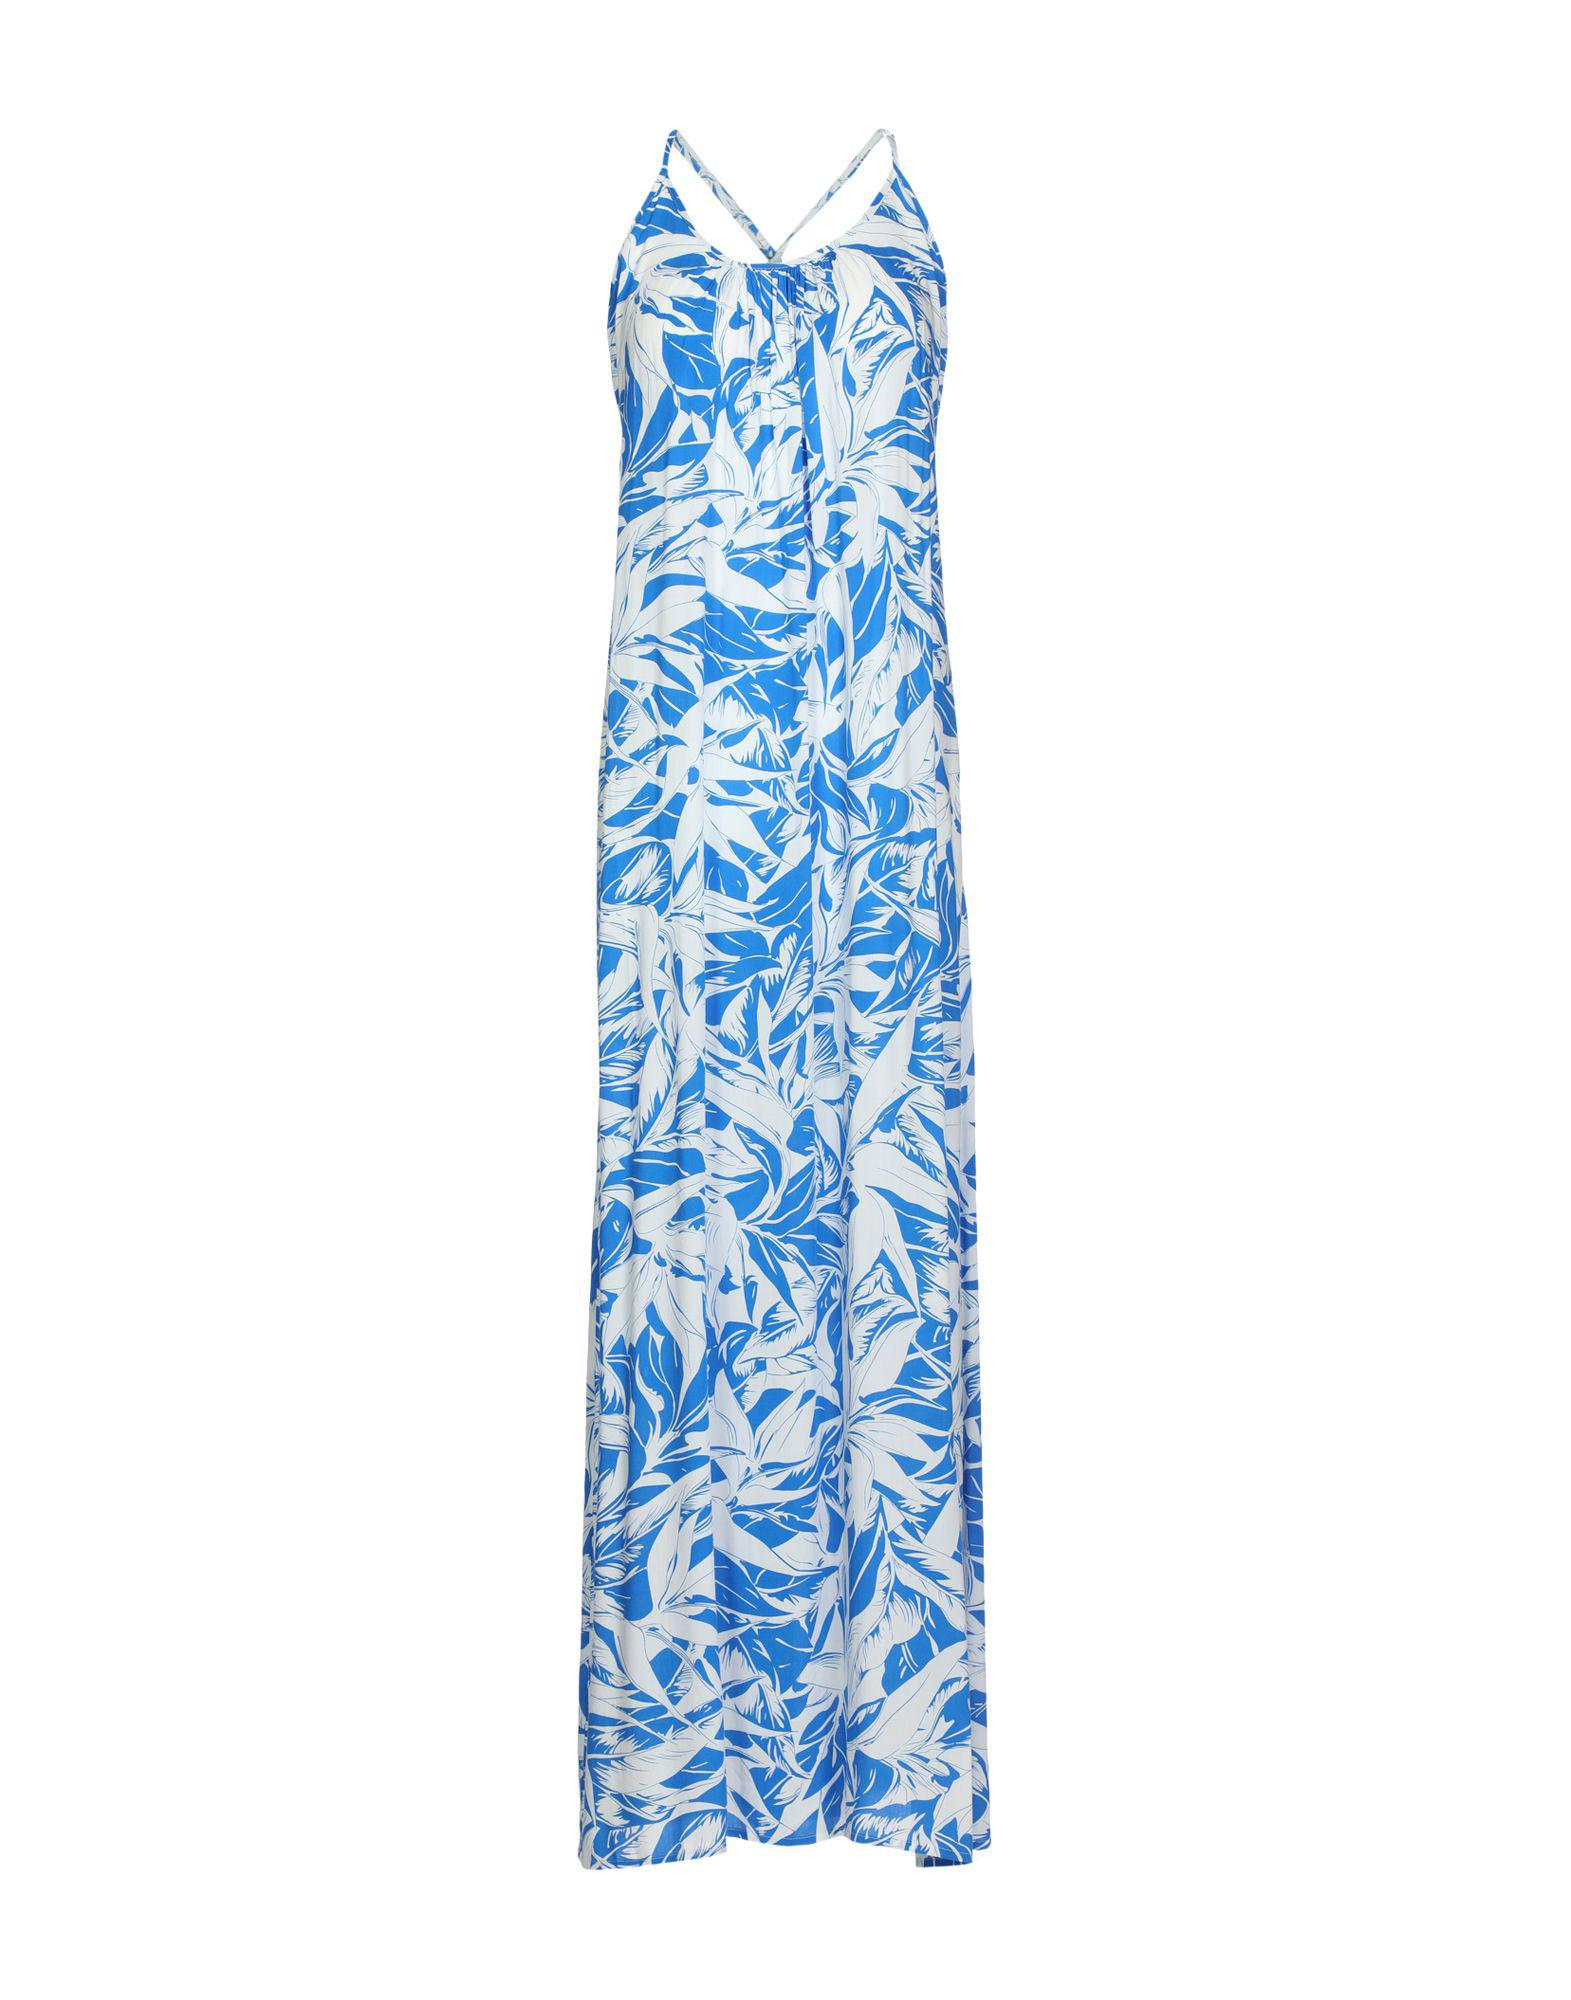 Melissa Odabash Synthetic Long Dress in Blue - Lyst